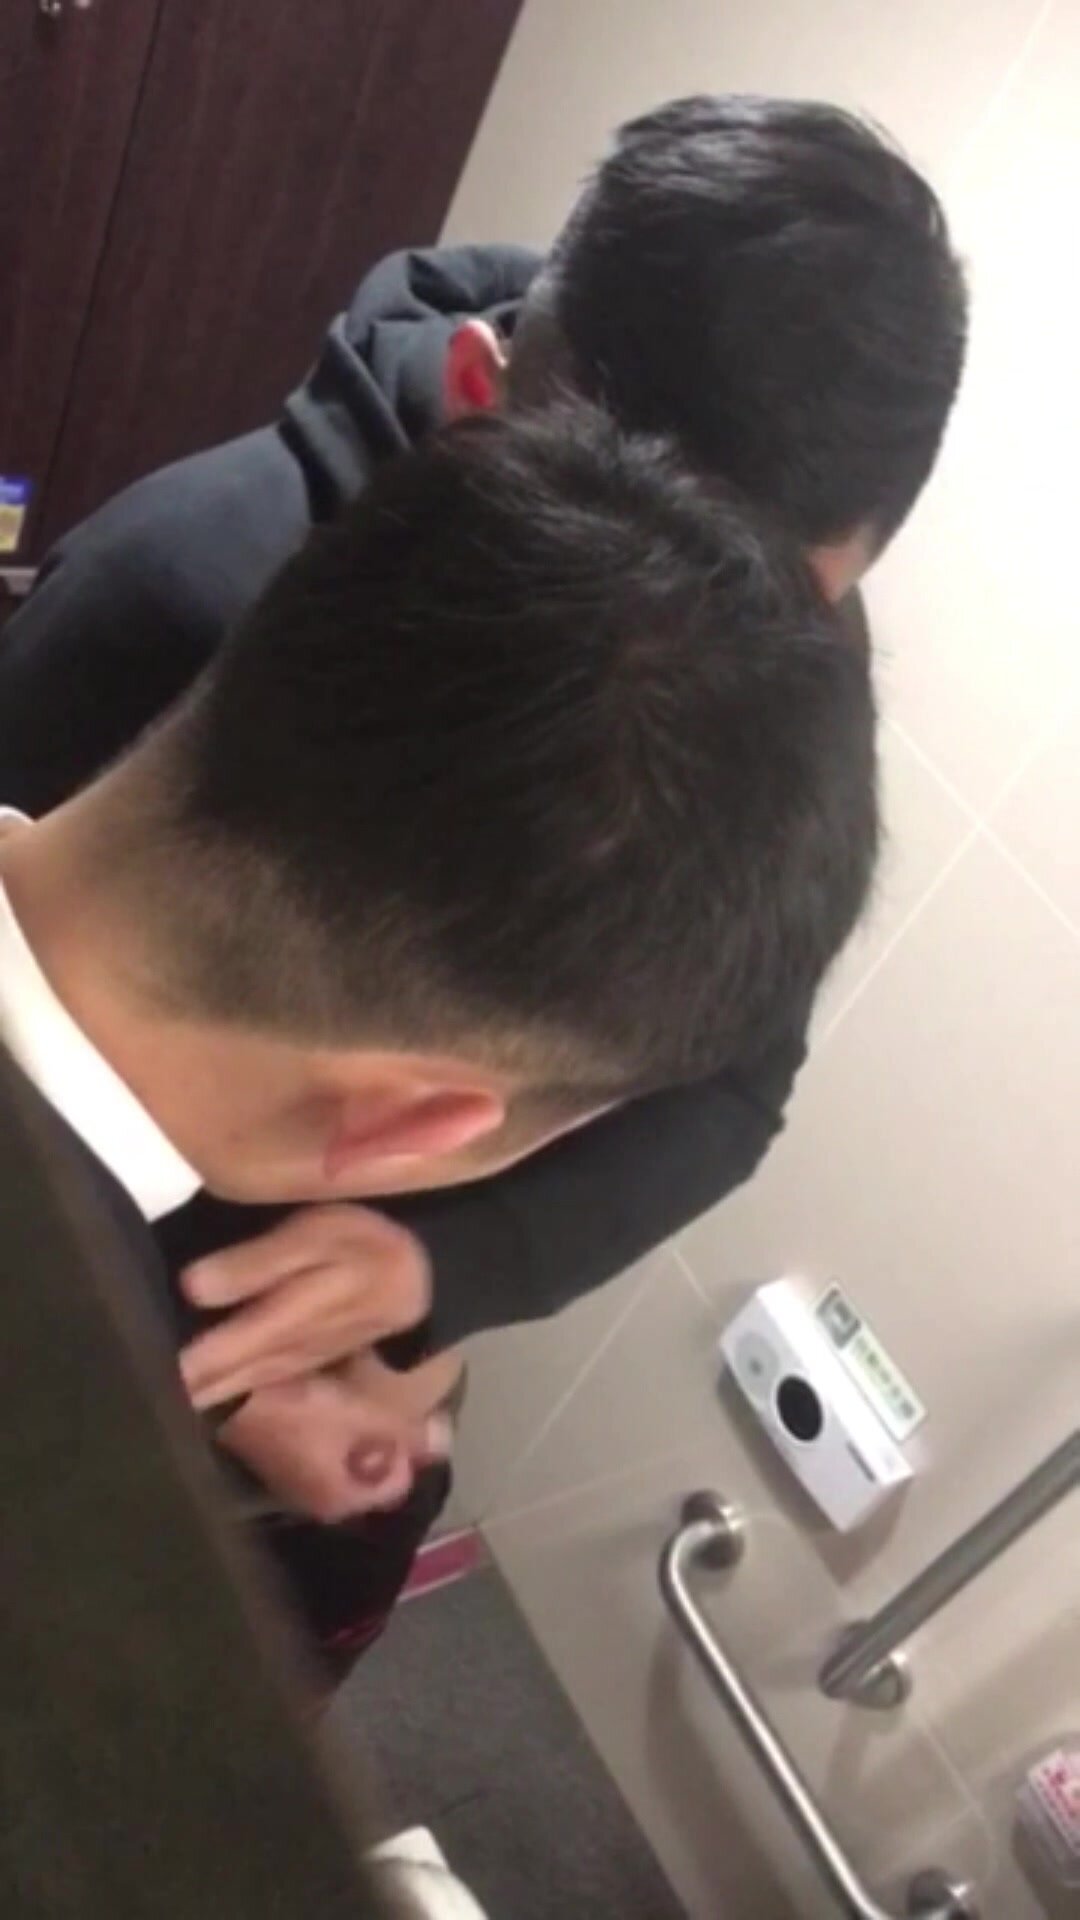 Spy- Asian guys jerking off together in a toilet stall